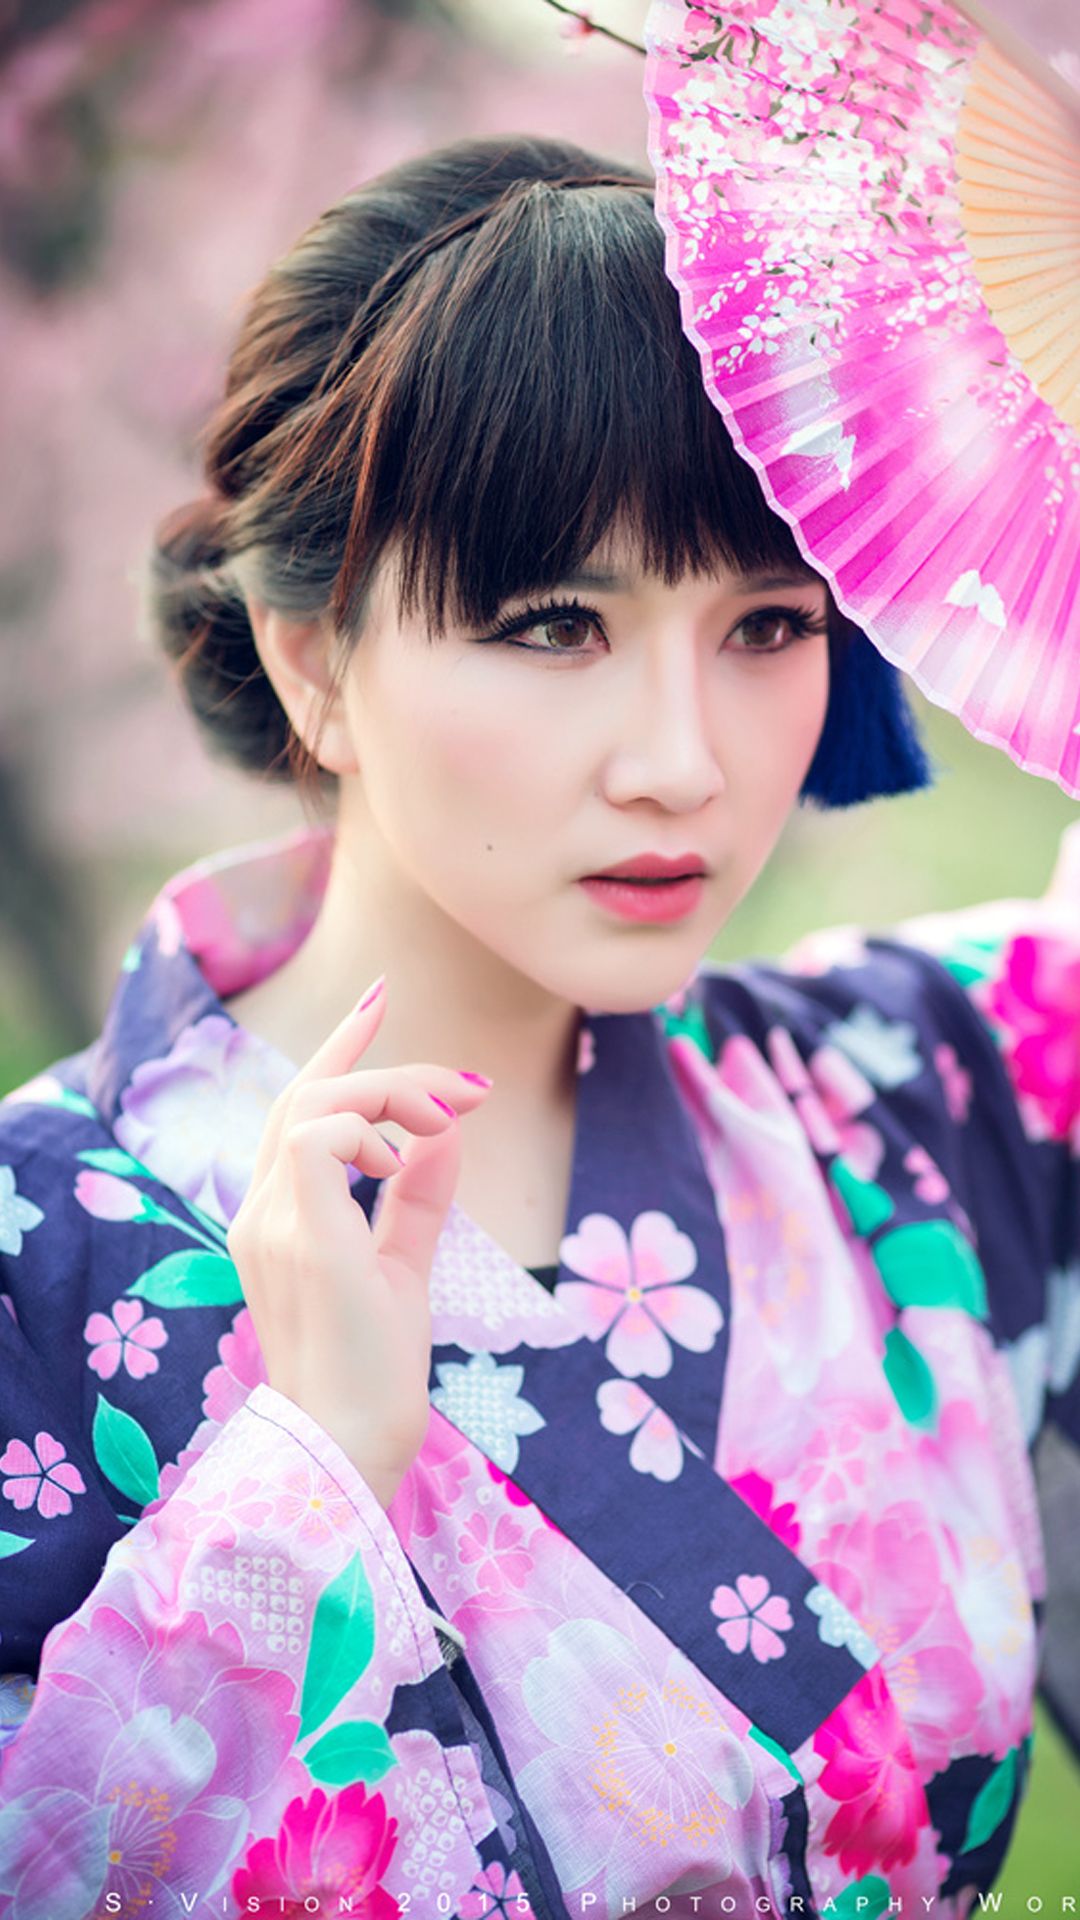 Cosplay Japanese culture Wallpaper and Background for iPhone